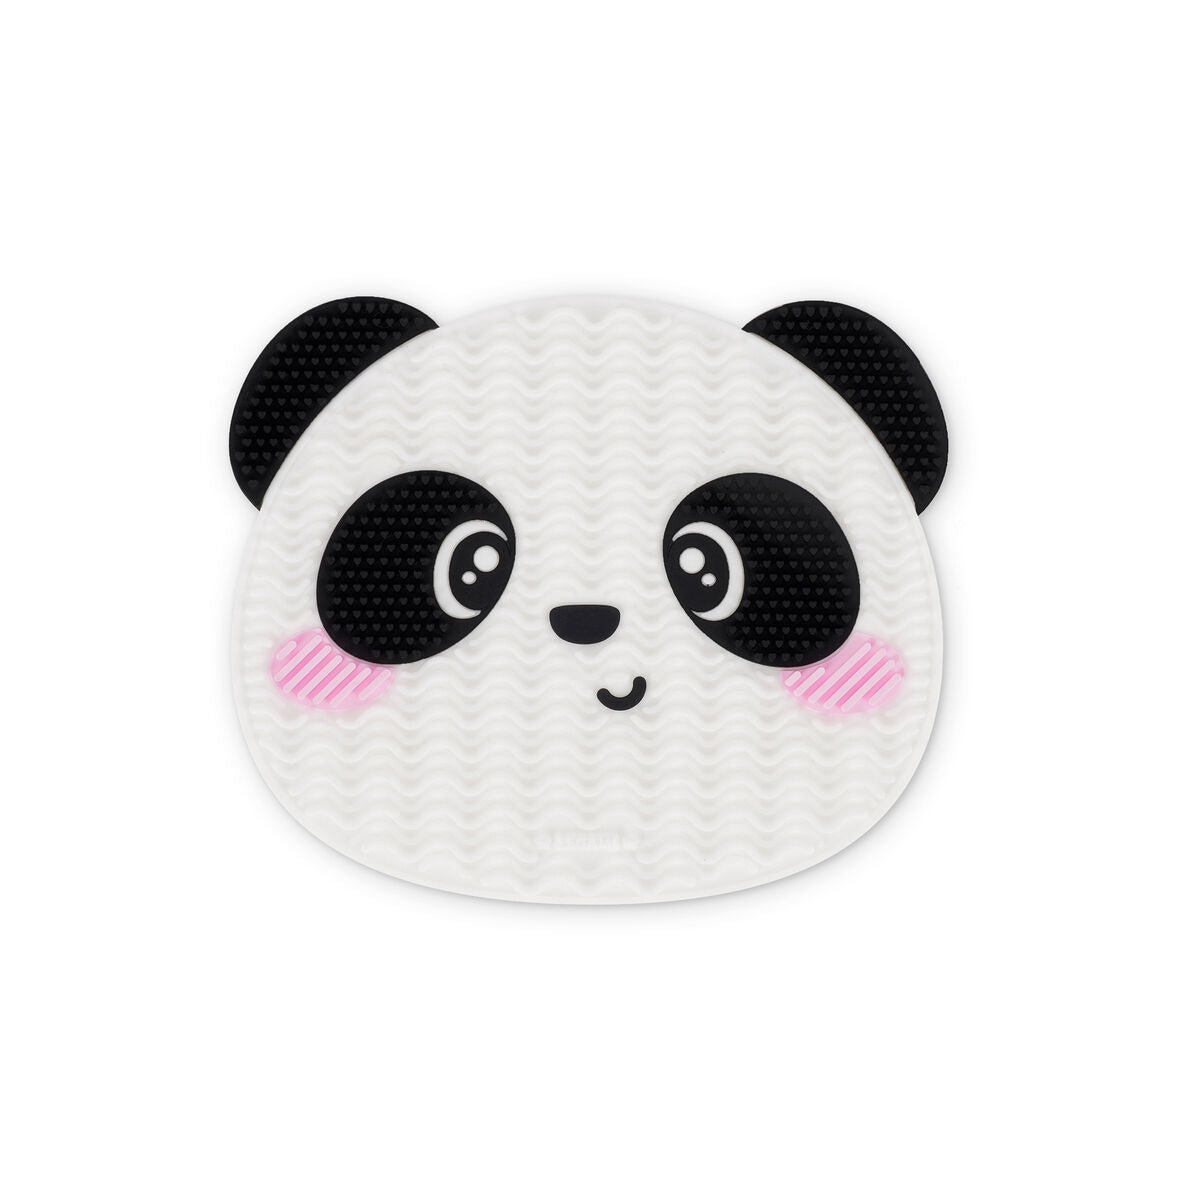 Beauty | Legami Makeup Brush Cleaning Pad Panda by Weirs of Baggot Street